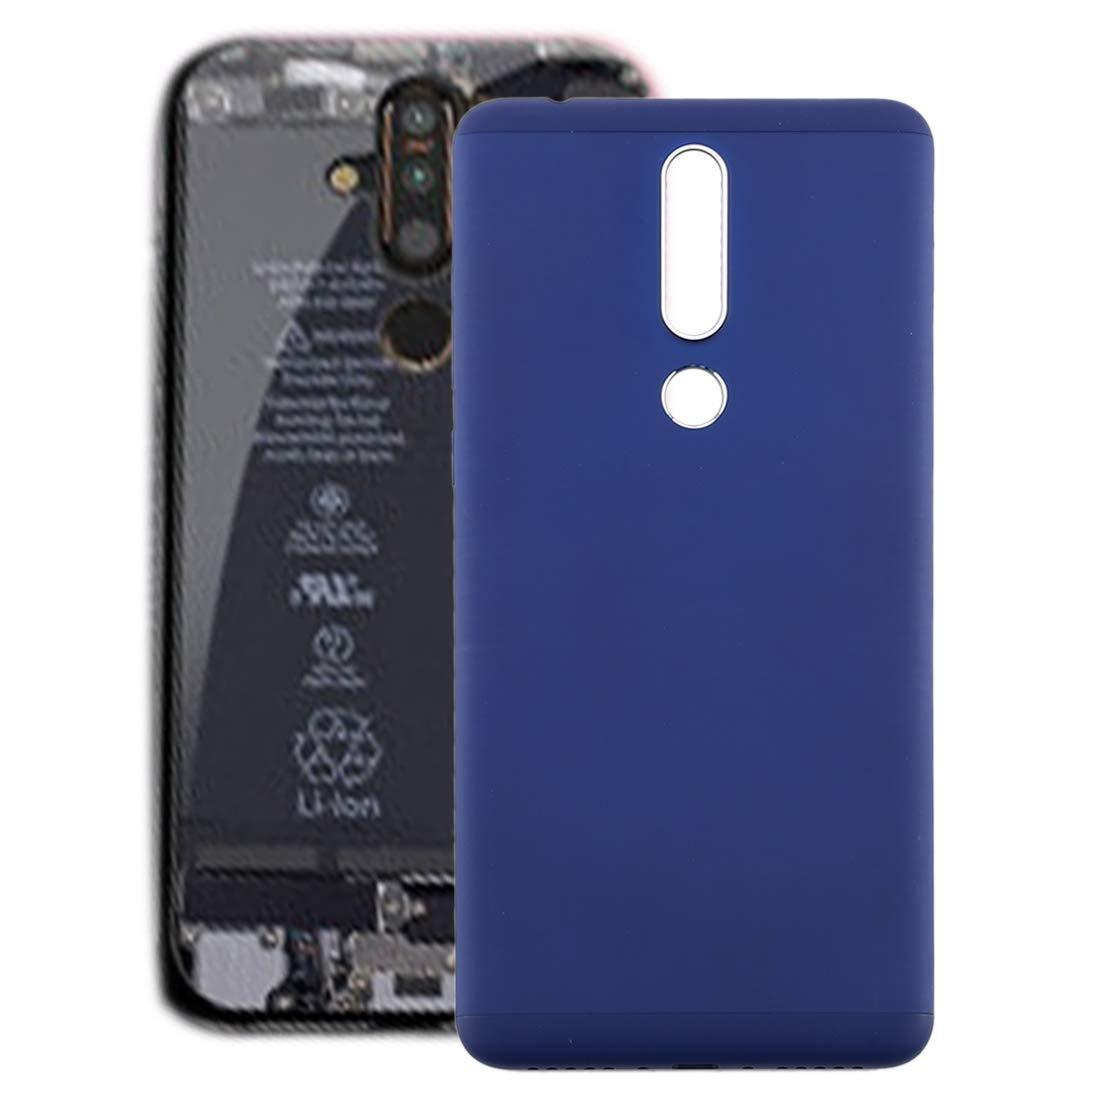 Back Glass Panel for Nokia 3.1 Plus  Blue